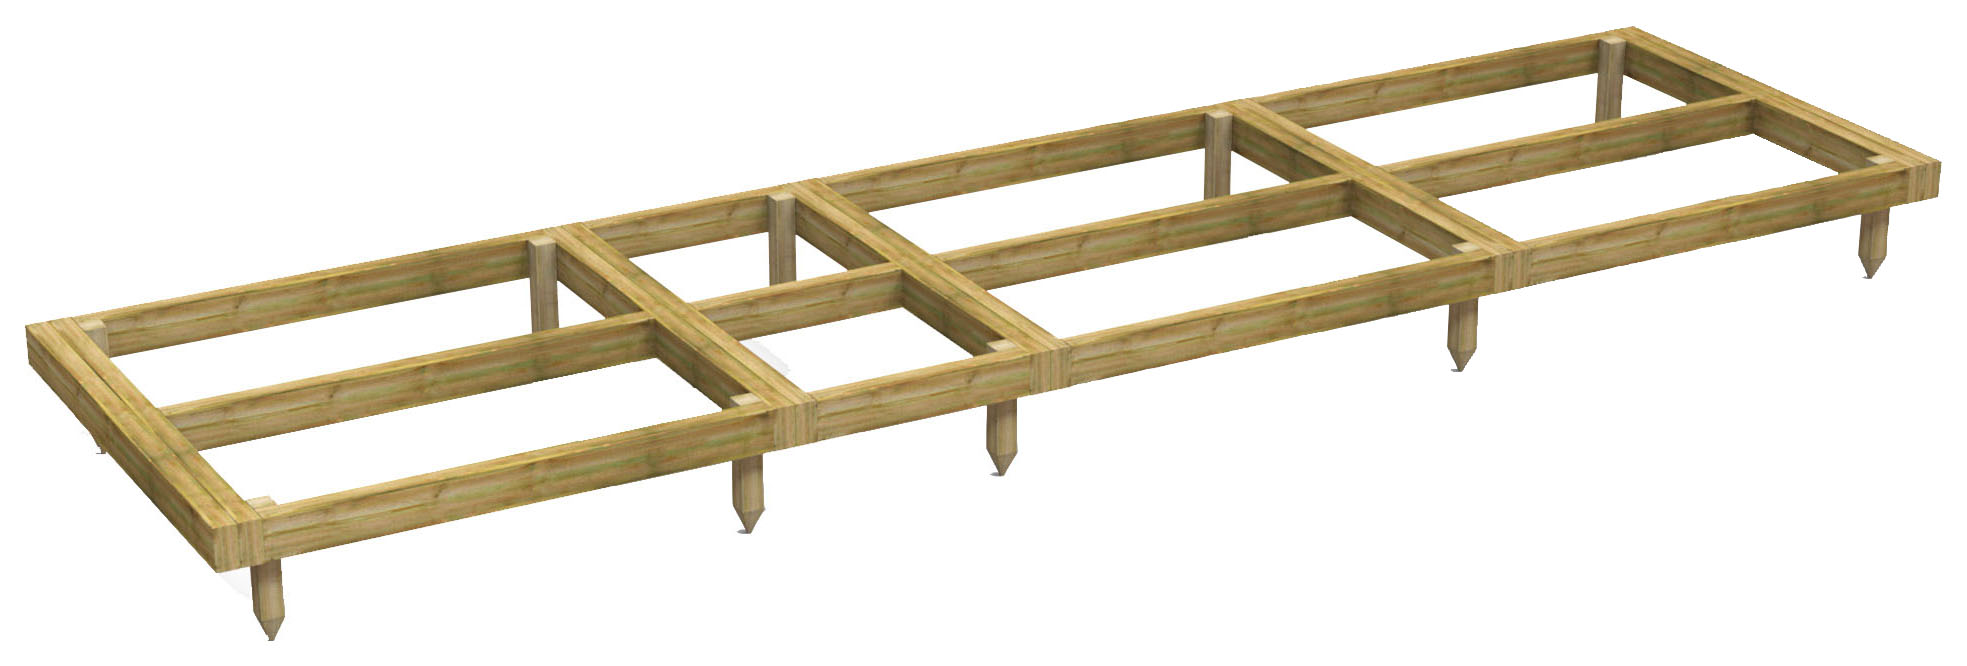 Image of Power Sheds 14 x 4ft Pressure Treated Garden Building Base Kit